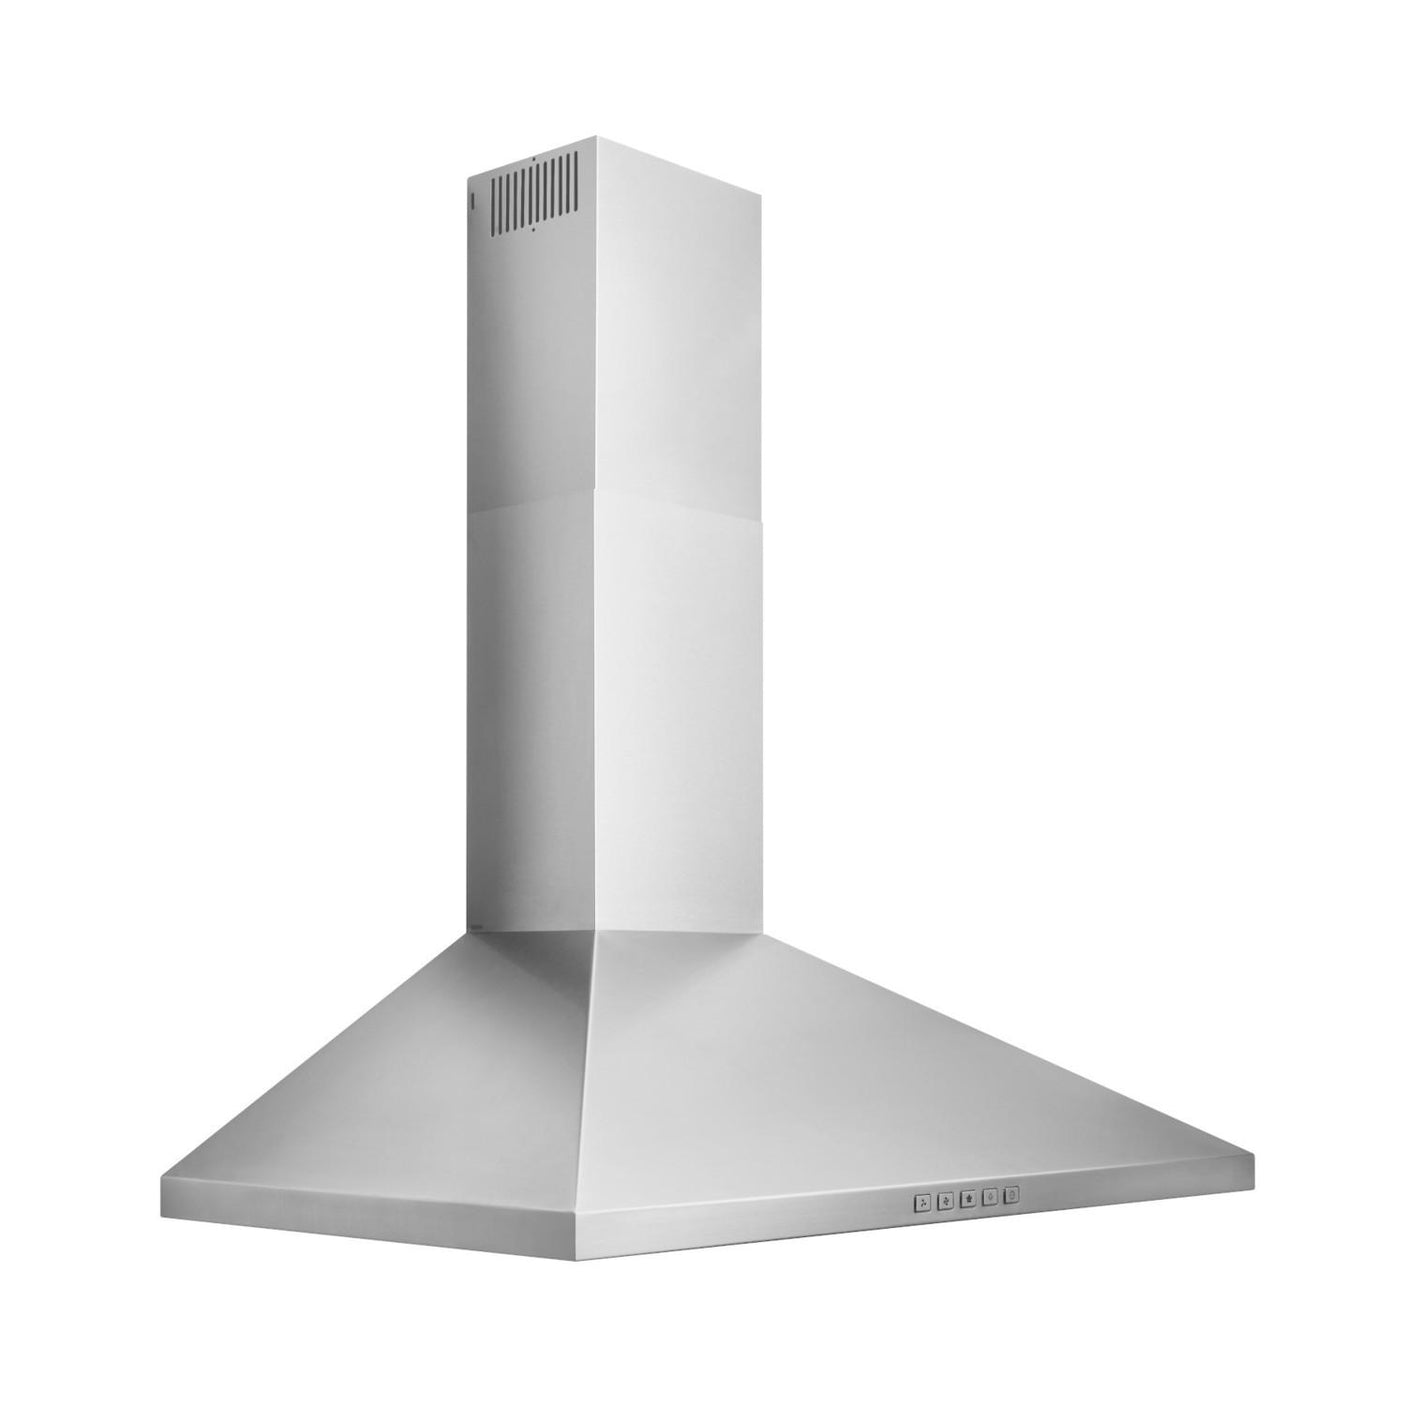 **DISCONTINUED** Broan® 36-Inch Convertible Wall-Mount Pyramidal Chimney Range Hood, 450 MAX CFM, Stainless Steel